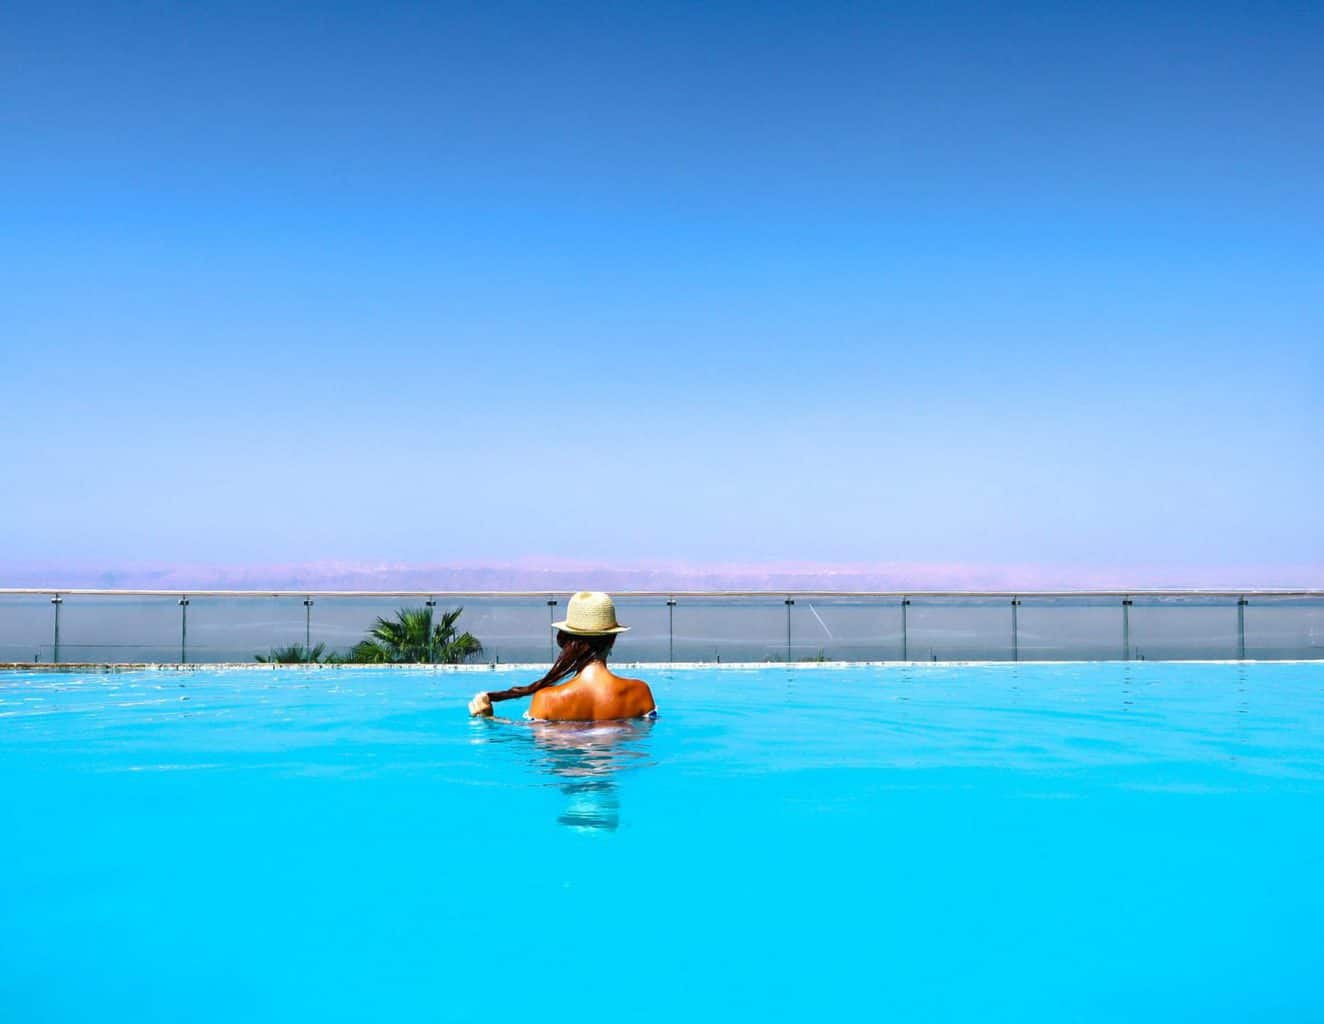 where to stay in the Dead Sea